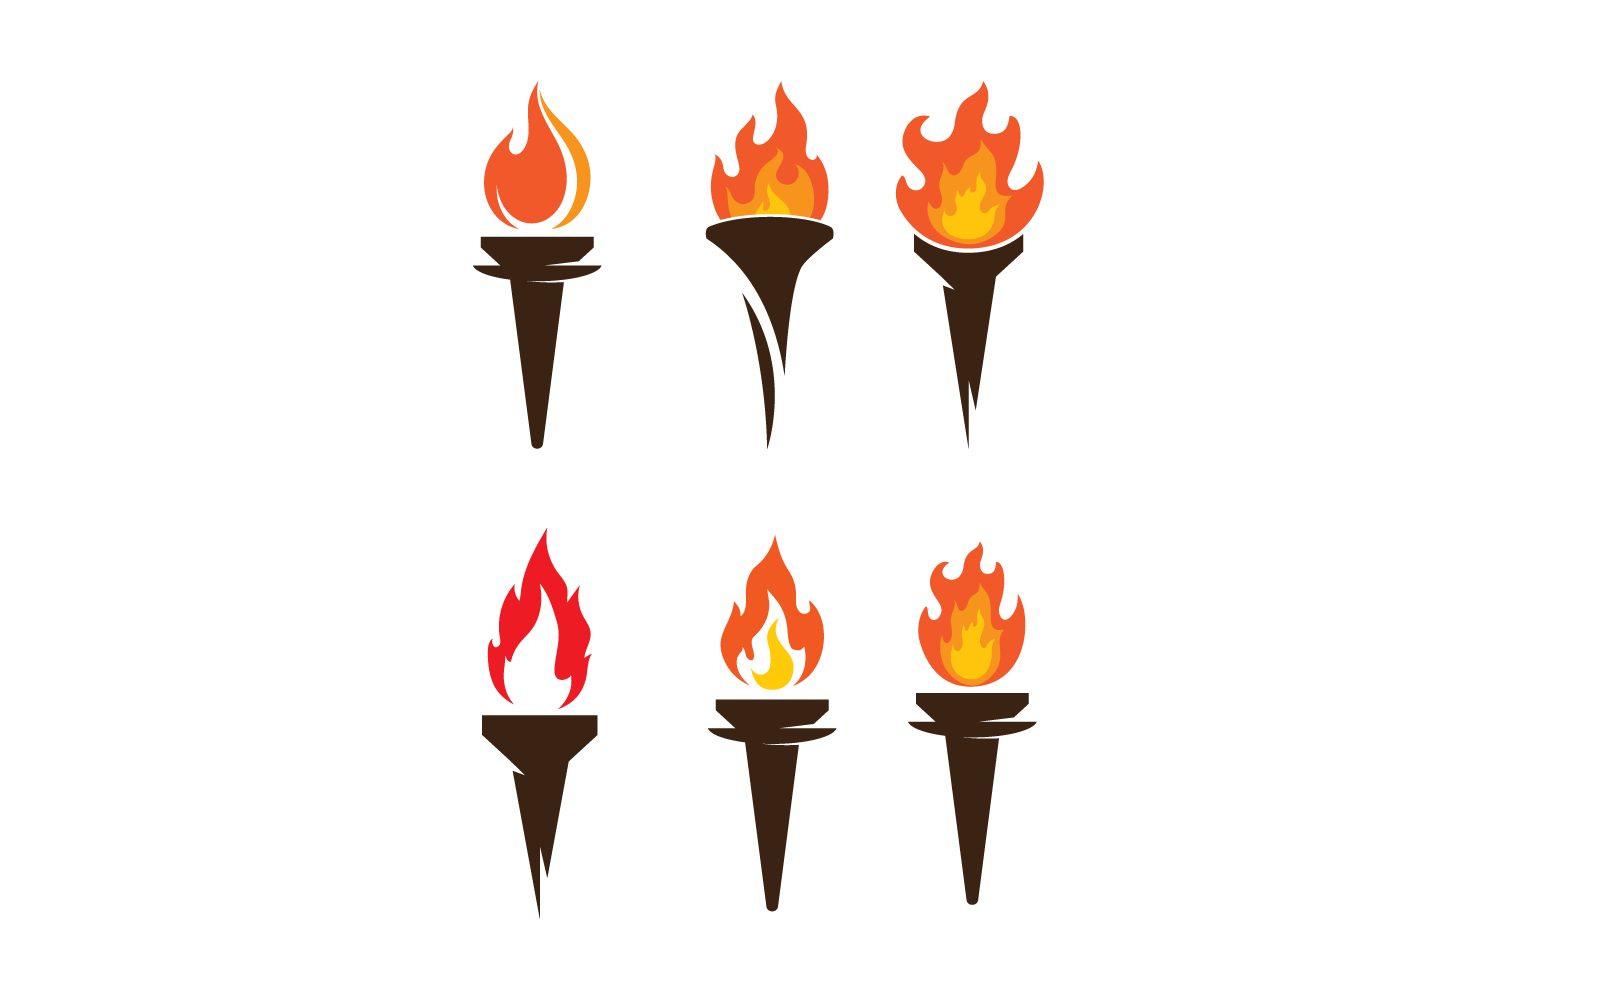 Illustration of torch fire icon vector flat design